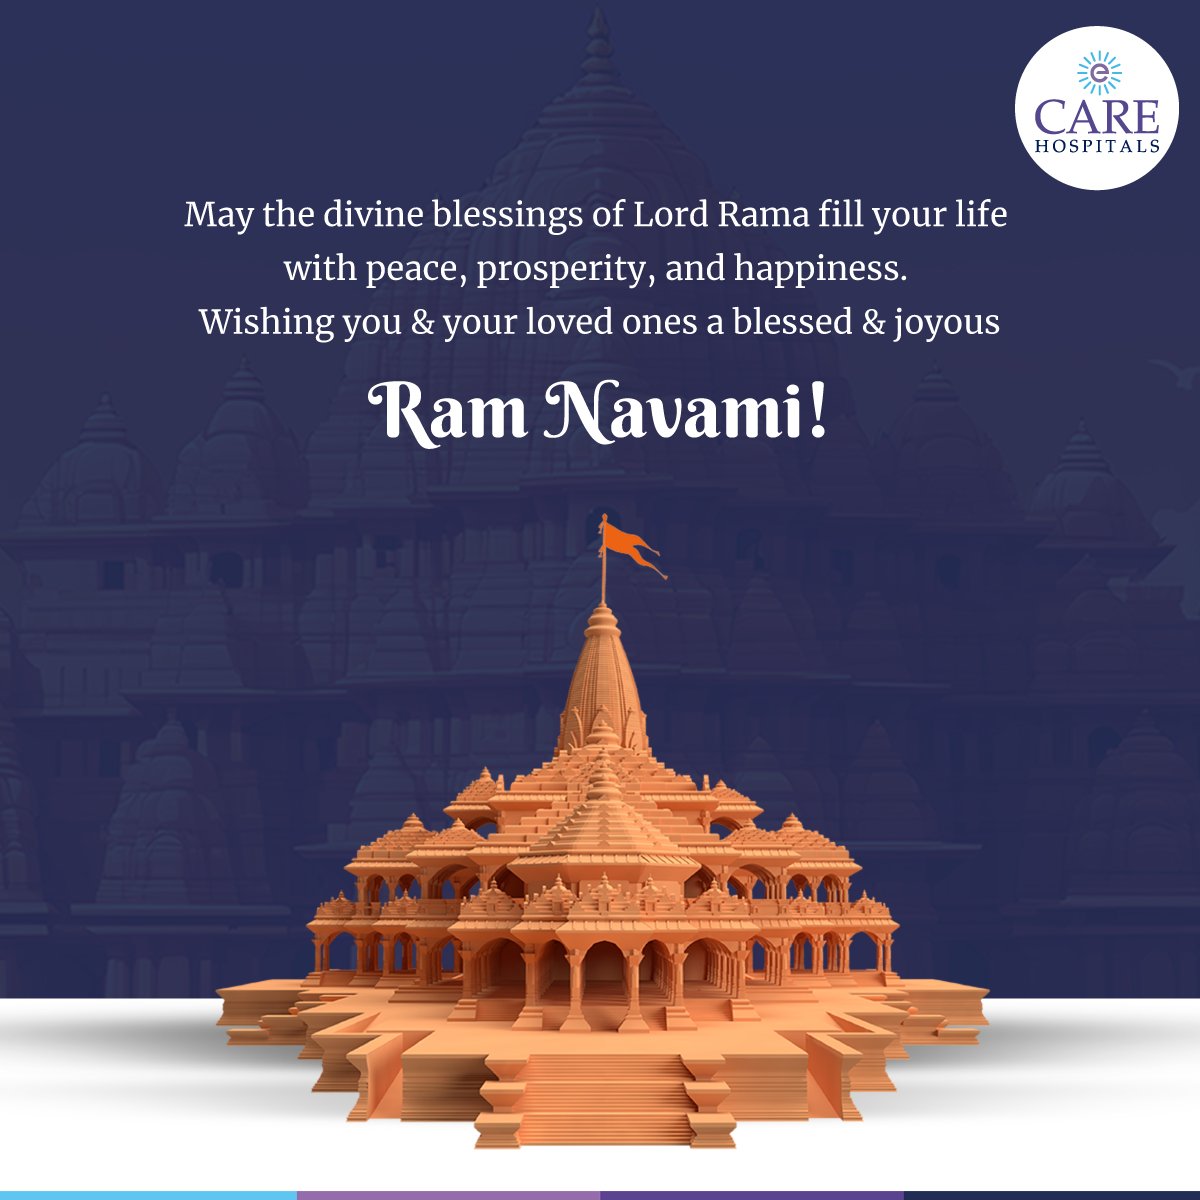 On this sacred day of Ram Navami, let the divine blessings of Lord Rama illuminate your path with wisdom, love, and compassion. Wishing you and your loved ones a blessed and spiritually fulfilling Ram Navami.

#CAREHospitals #TransformingHealthcare #RamNavami #LordRama